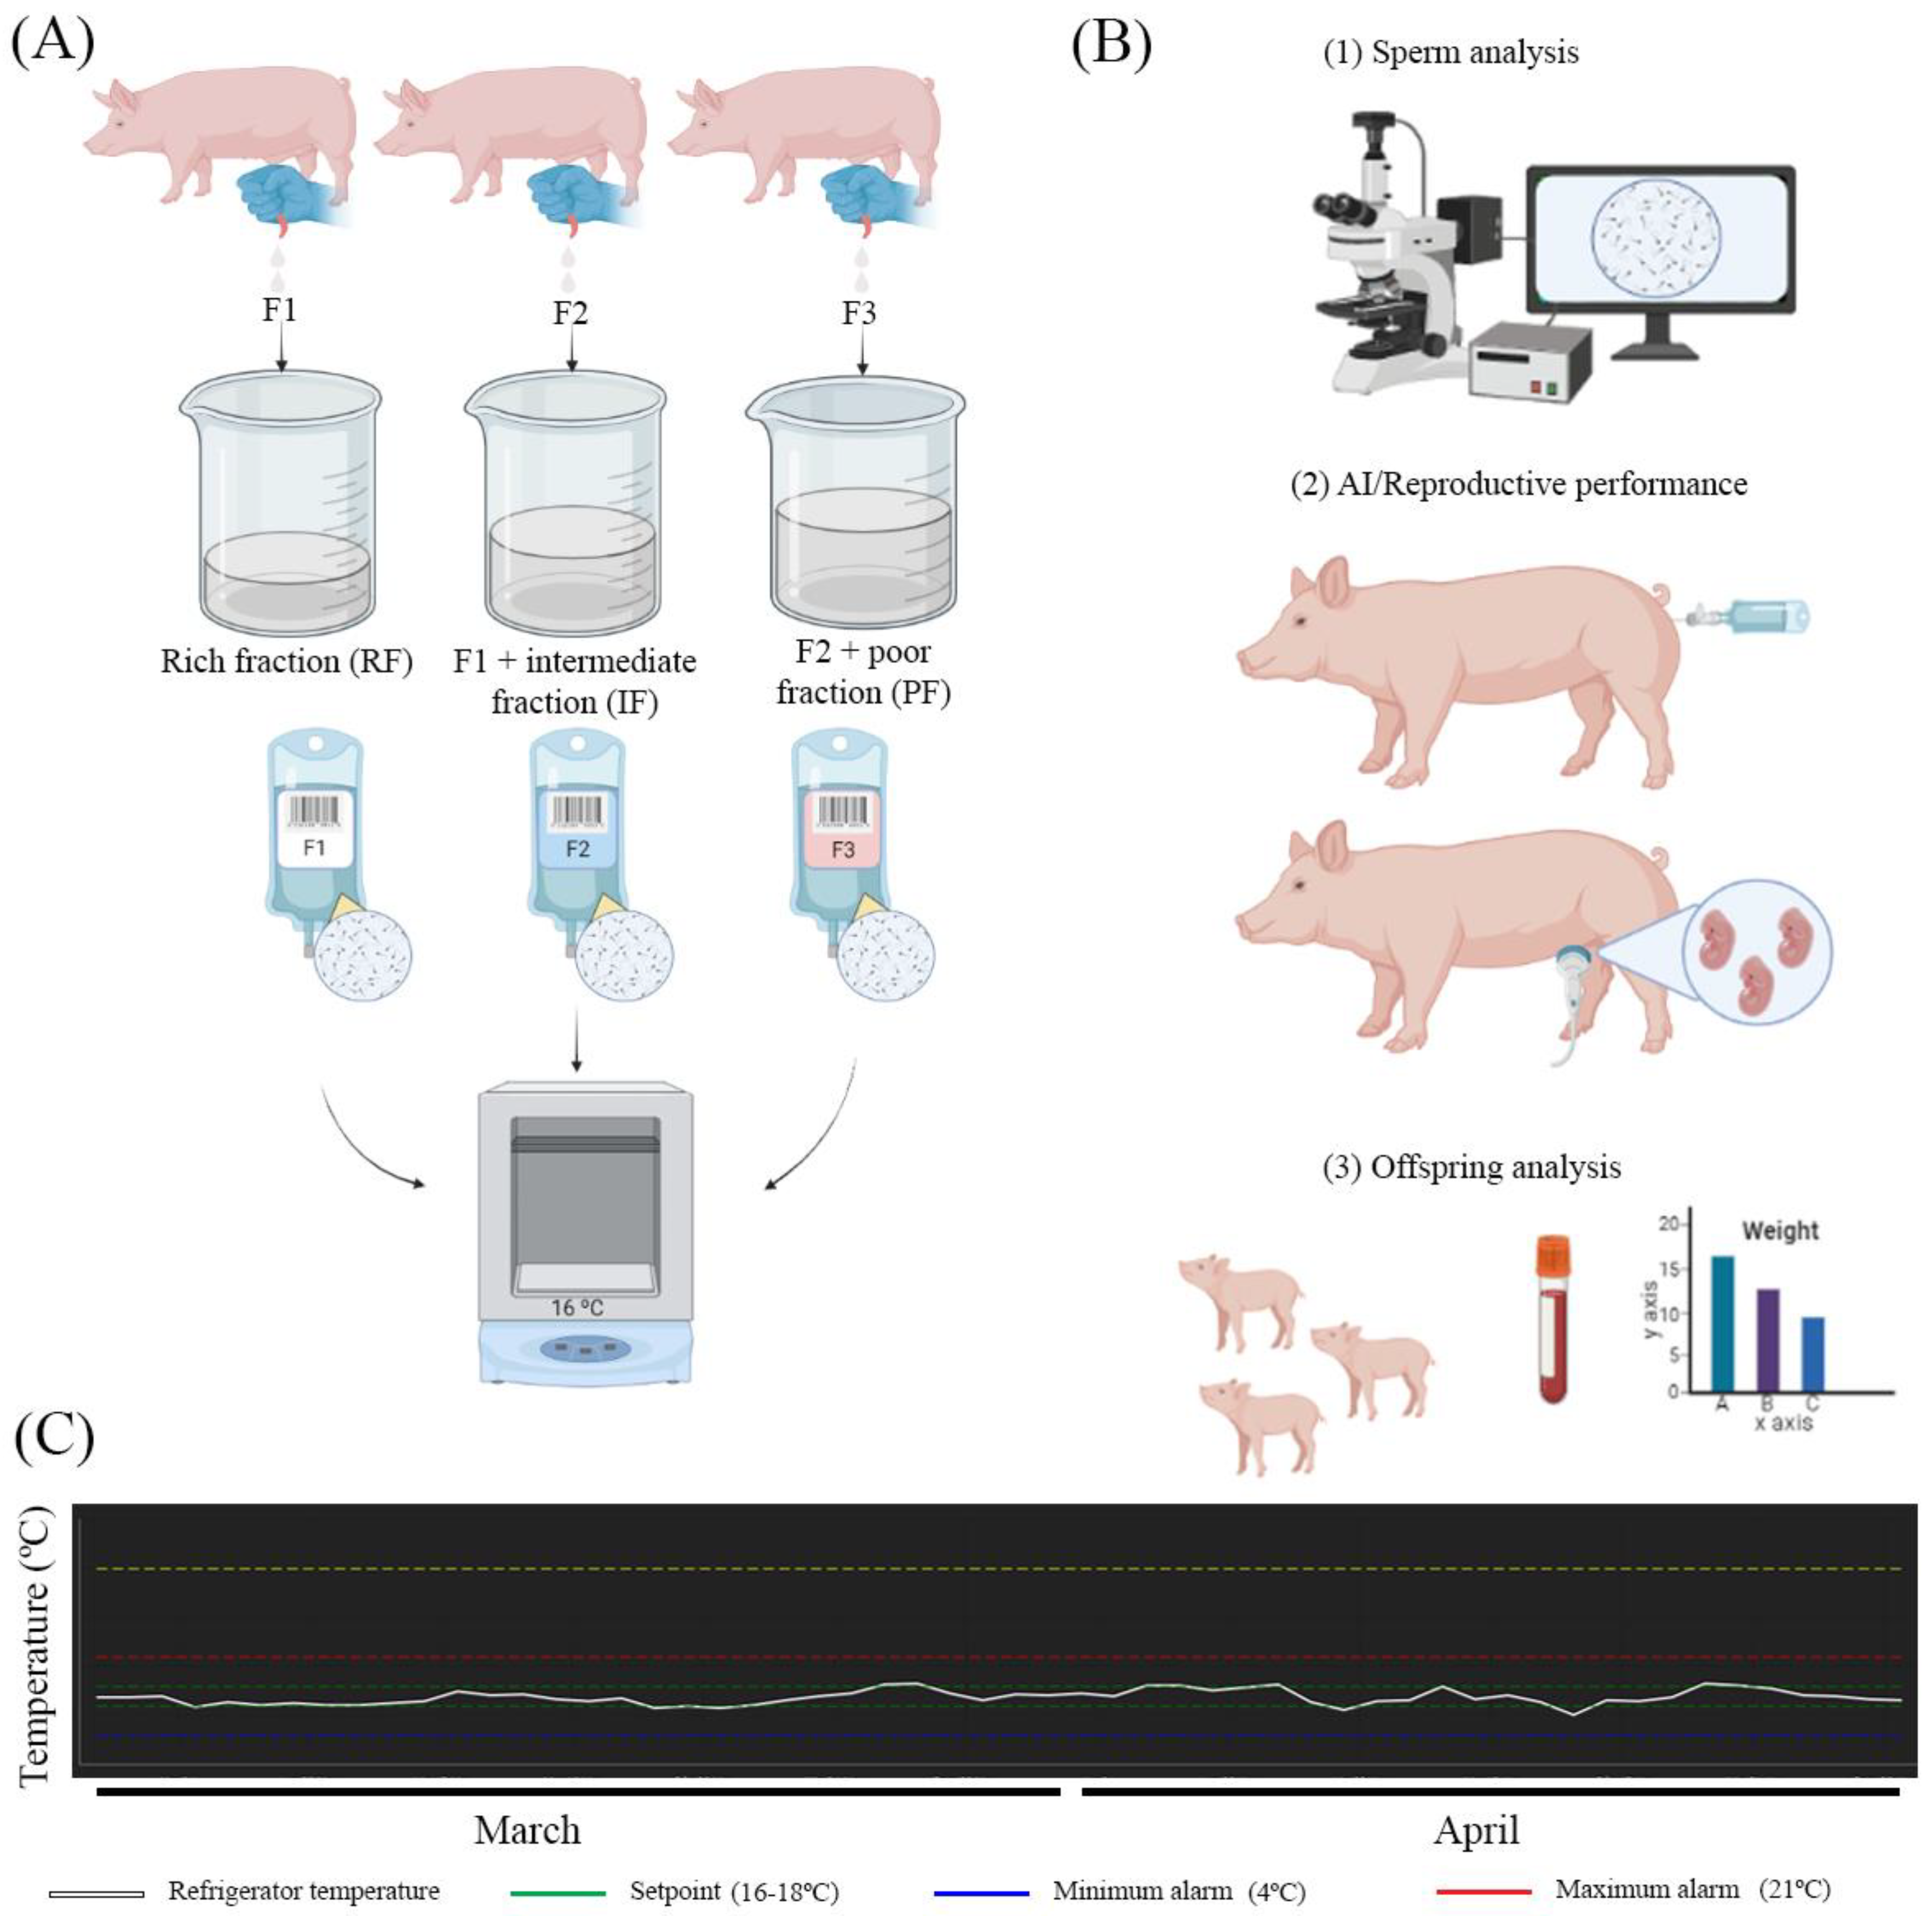 Biology | Free Full-Text | Should All Fractions of the Boar Ejaculate Be  Prepared for Insemination Rather Than Using the Sperm Rich Only?